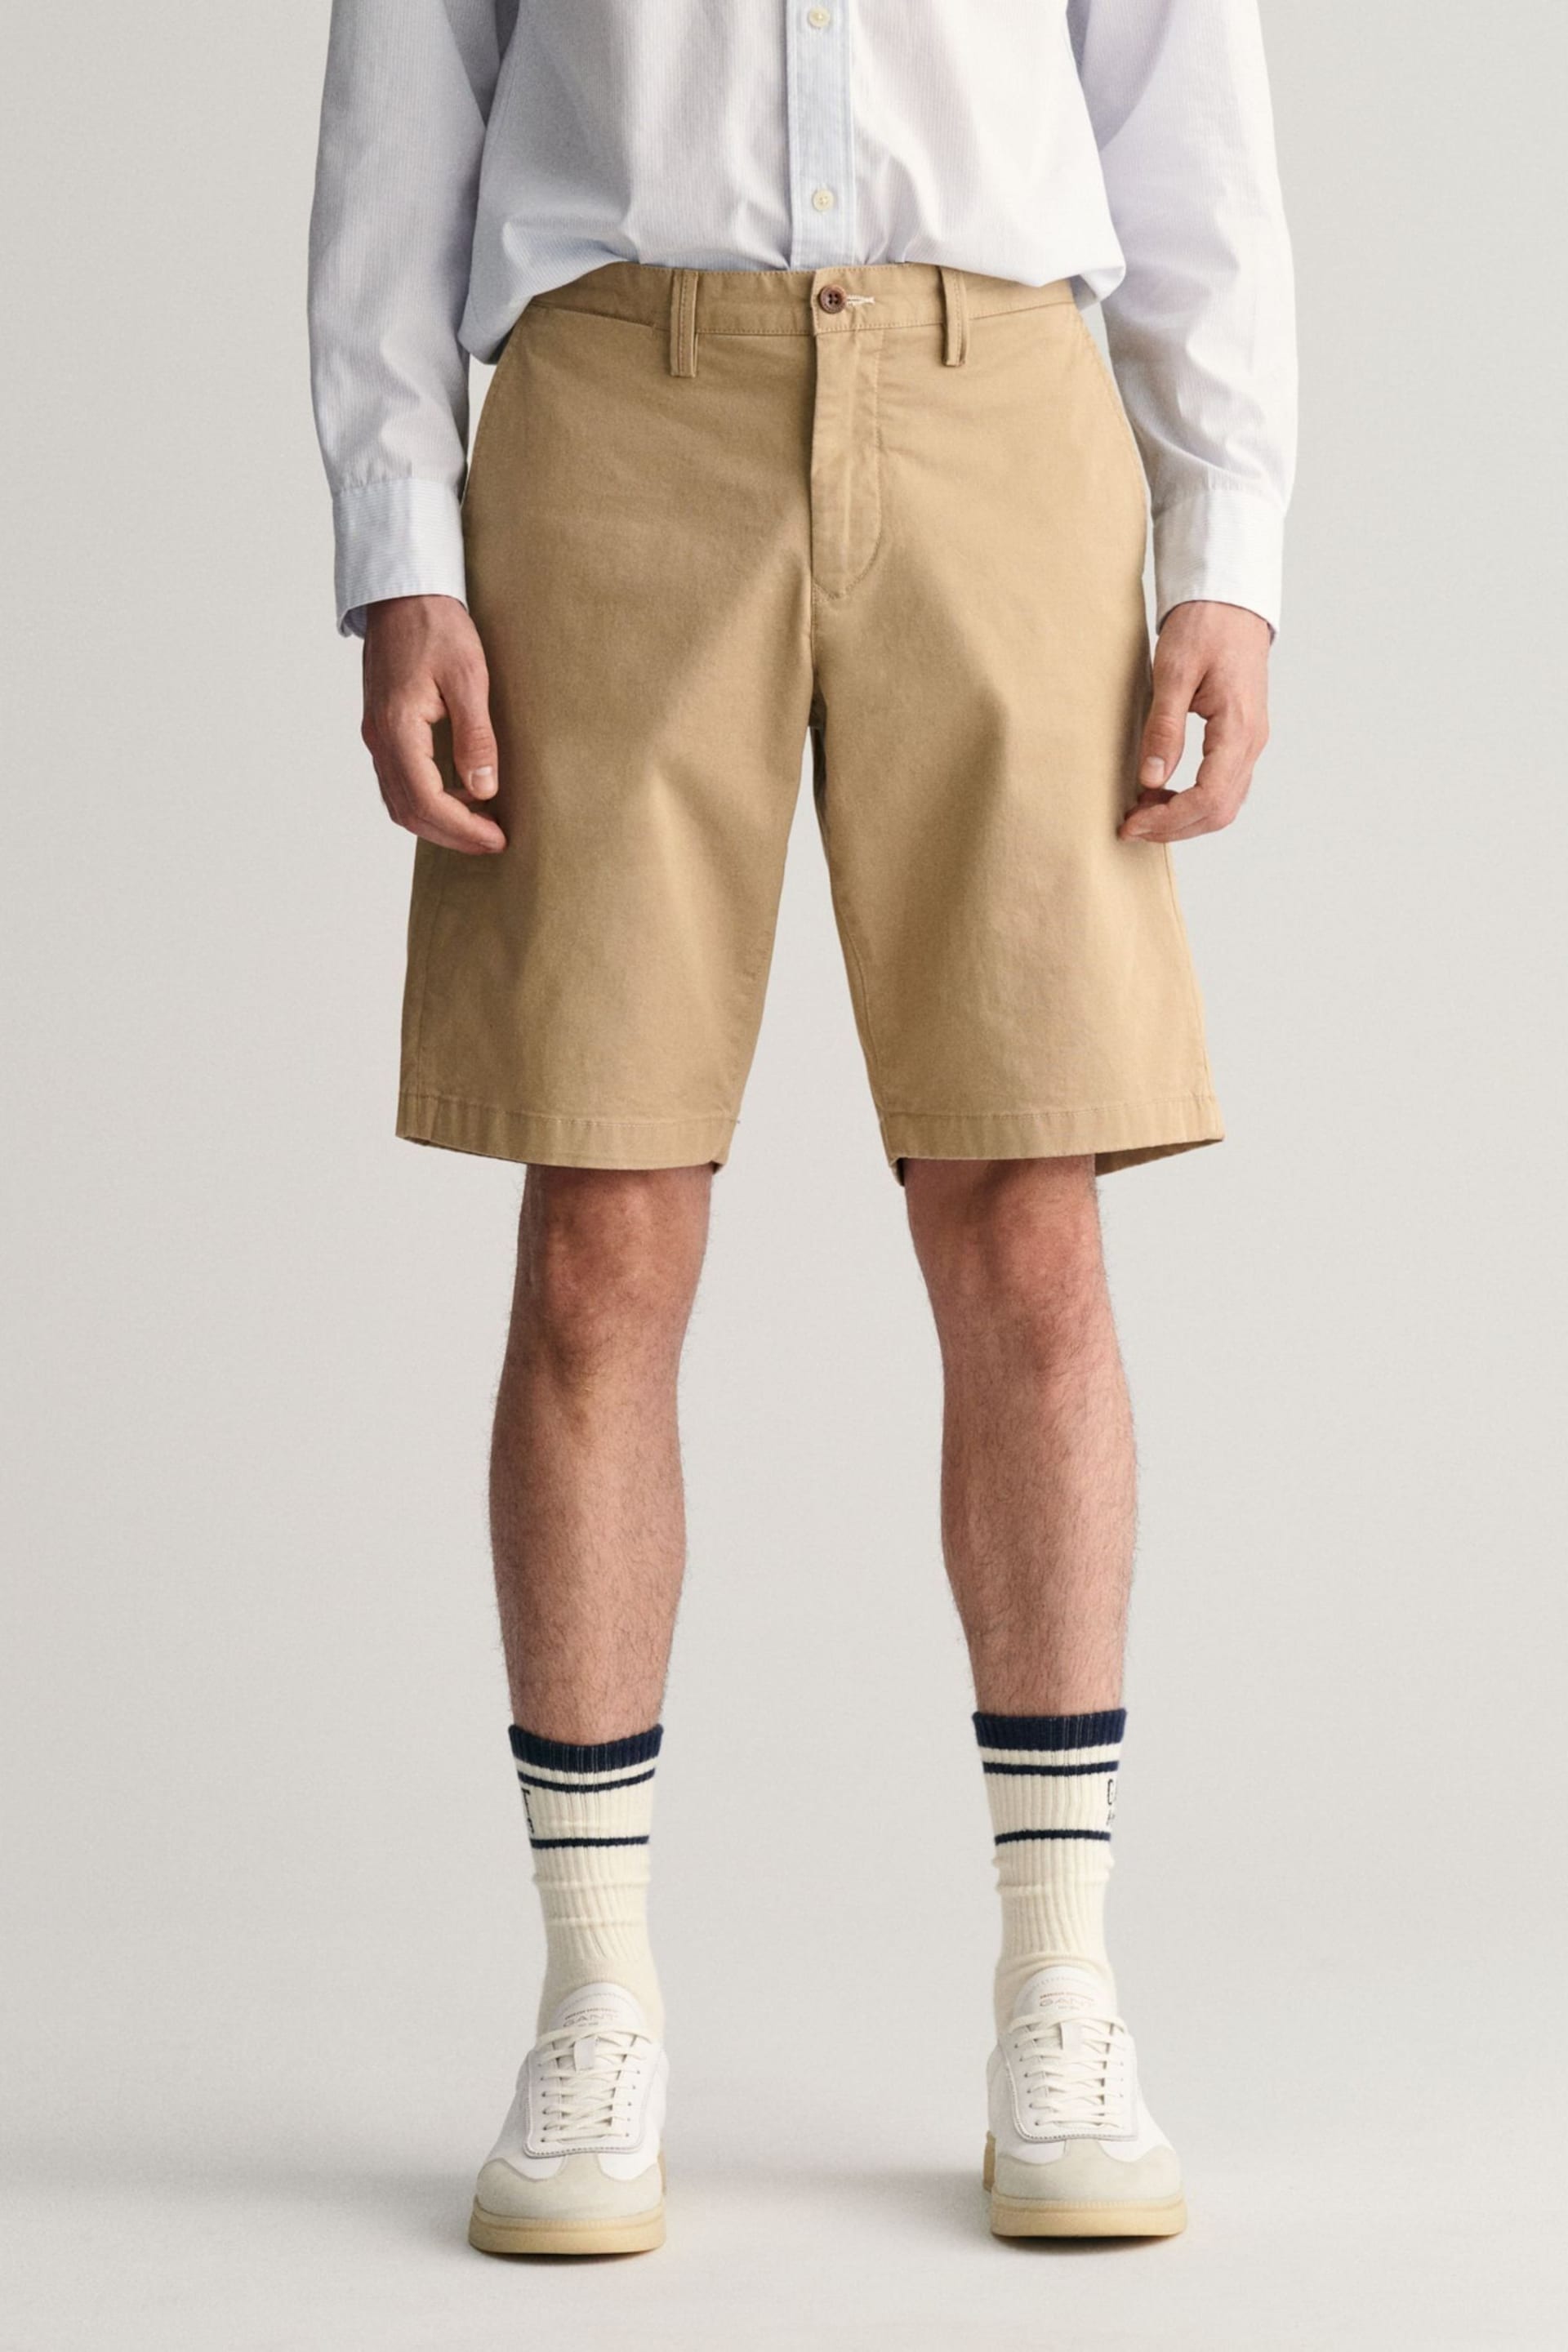 GANT Cream Relaxed Organic Cotton Blend Twill Shorts - Image 3 of 7